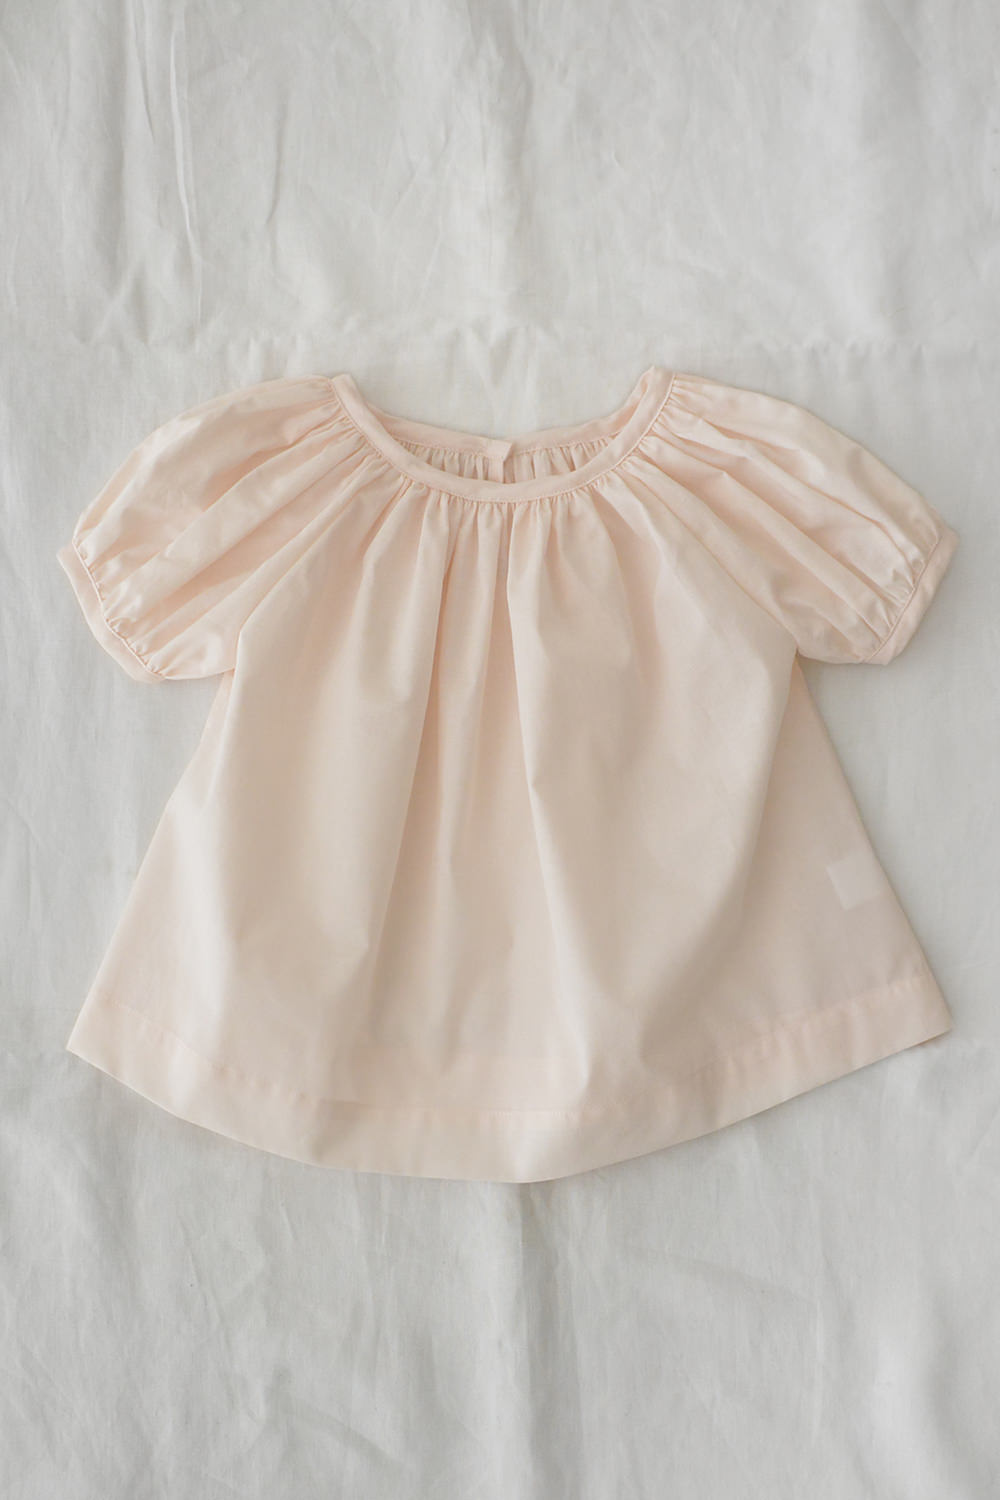 MAKIE（マキエ） Gathered Blouse Melody Pink　キッズブラウス　